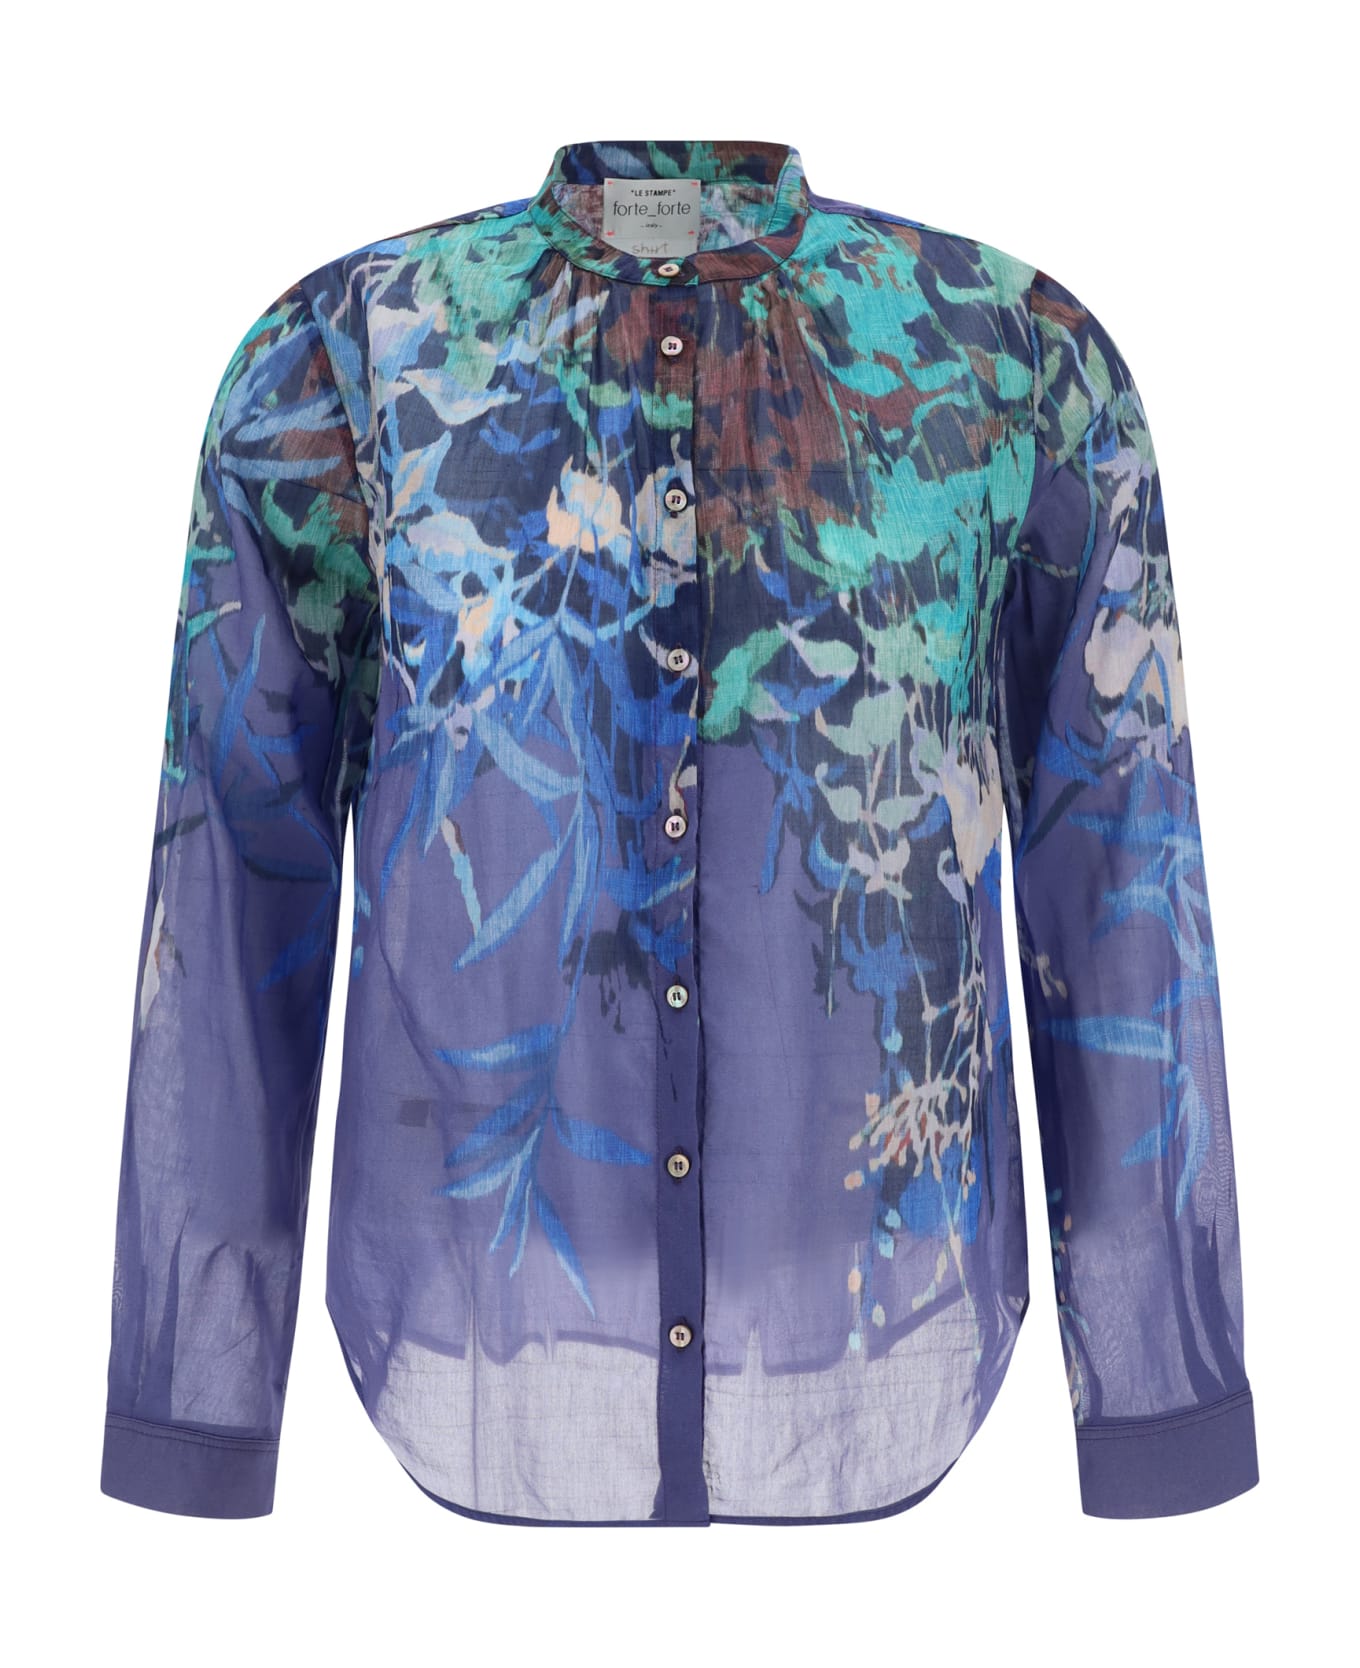 Forte_Forte Shirt - Clear Blue